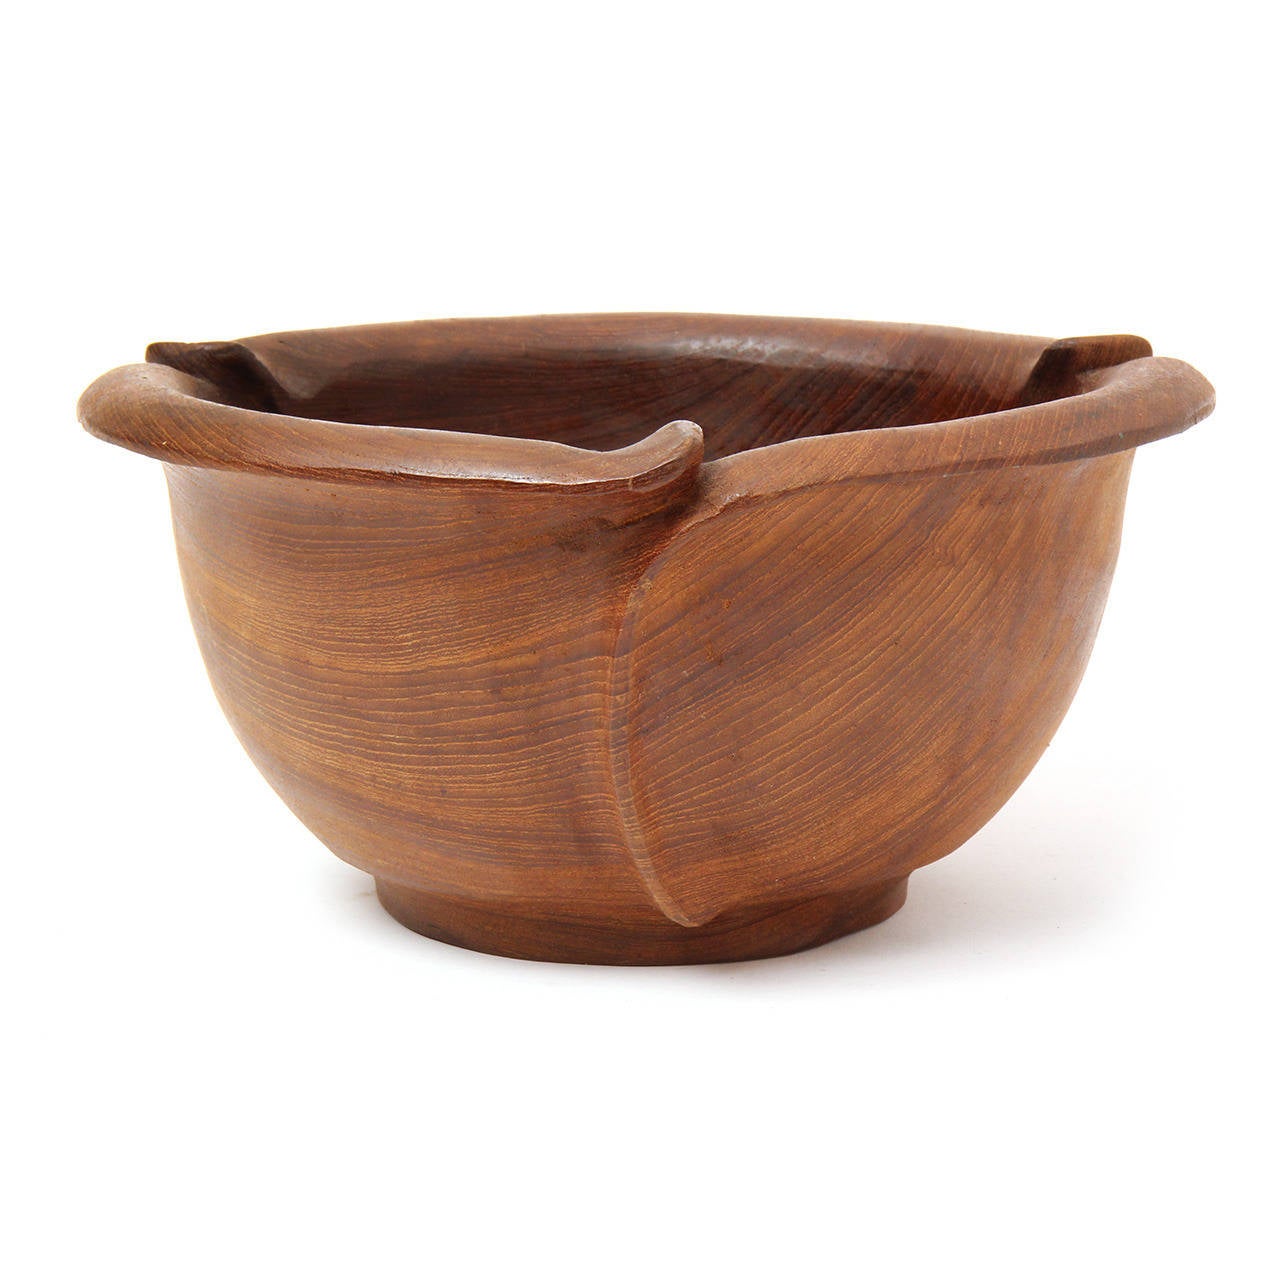 An interesting and finely crafted undulating and scalloped bowl made from a solid block of figured walnut.